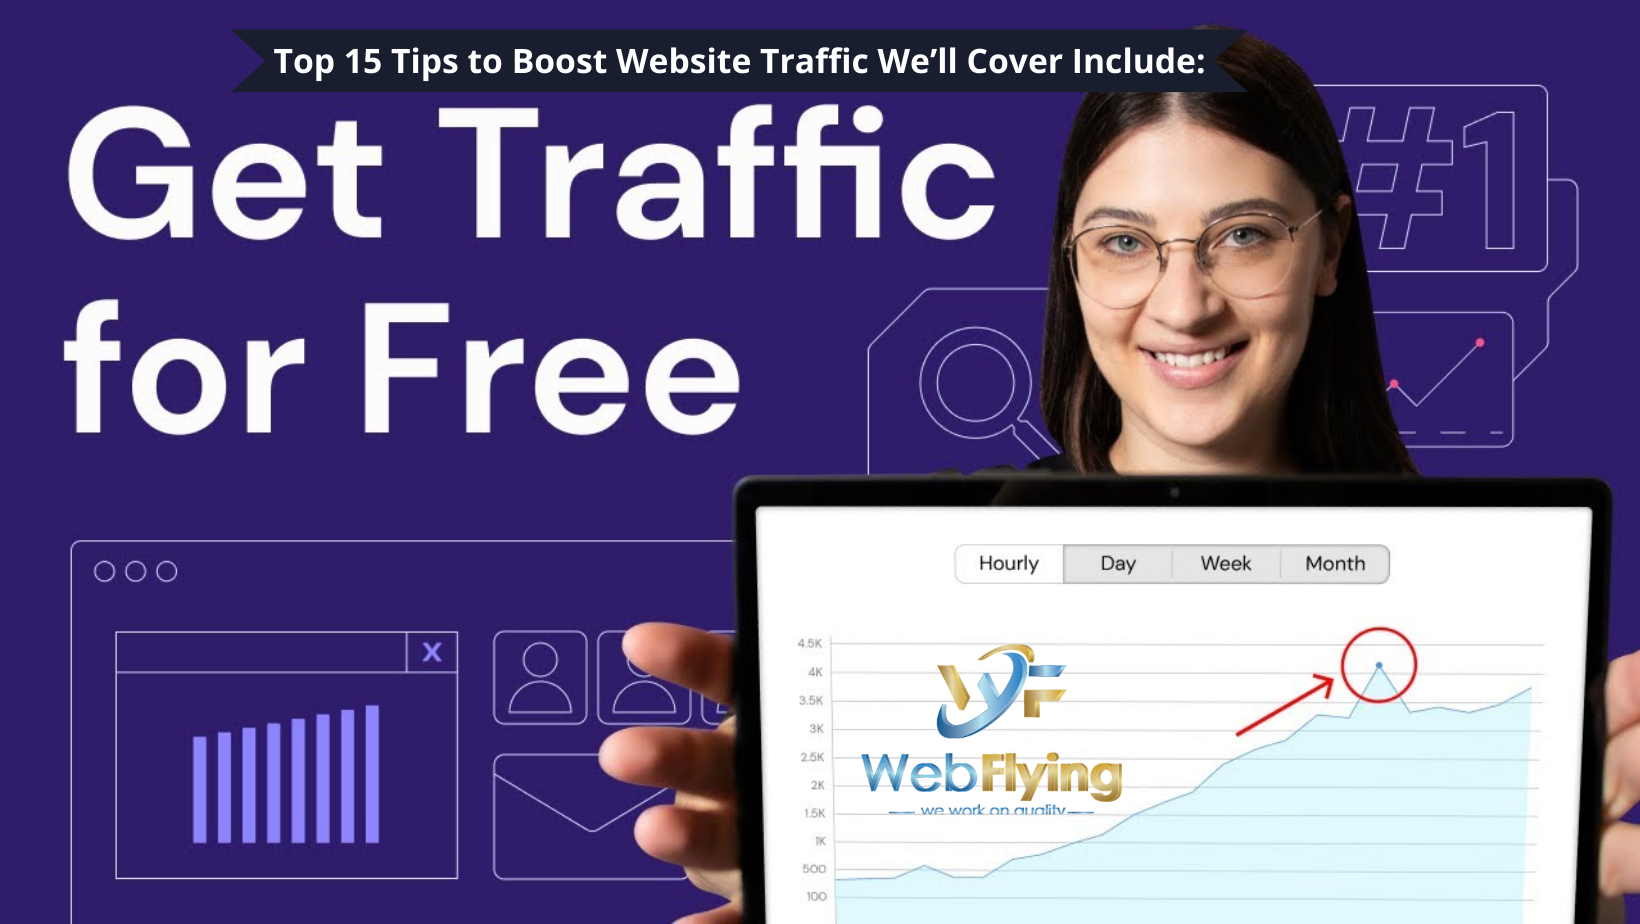 Top 15 Tips to Boost Website Traffic We’ll Cover Include